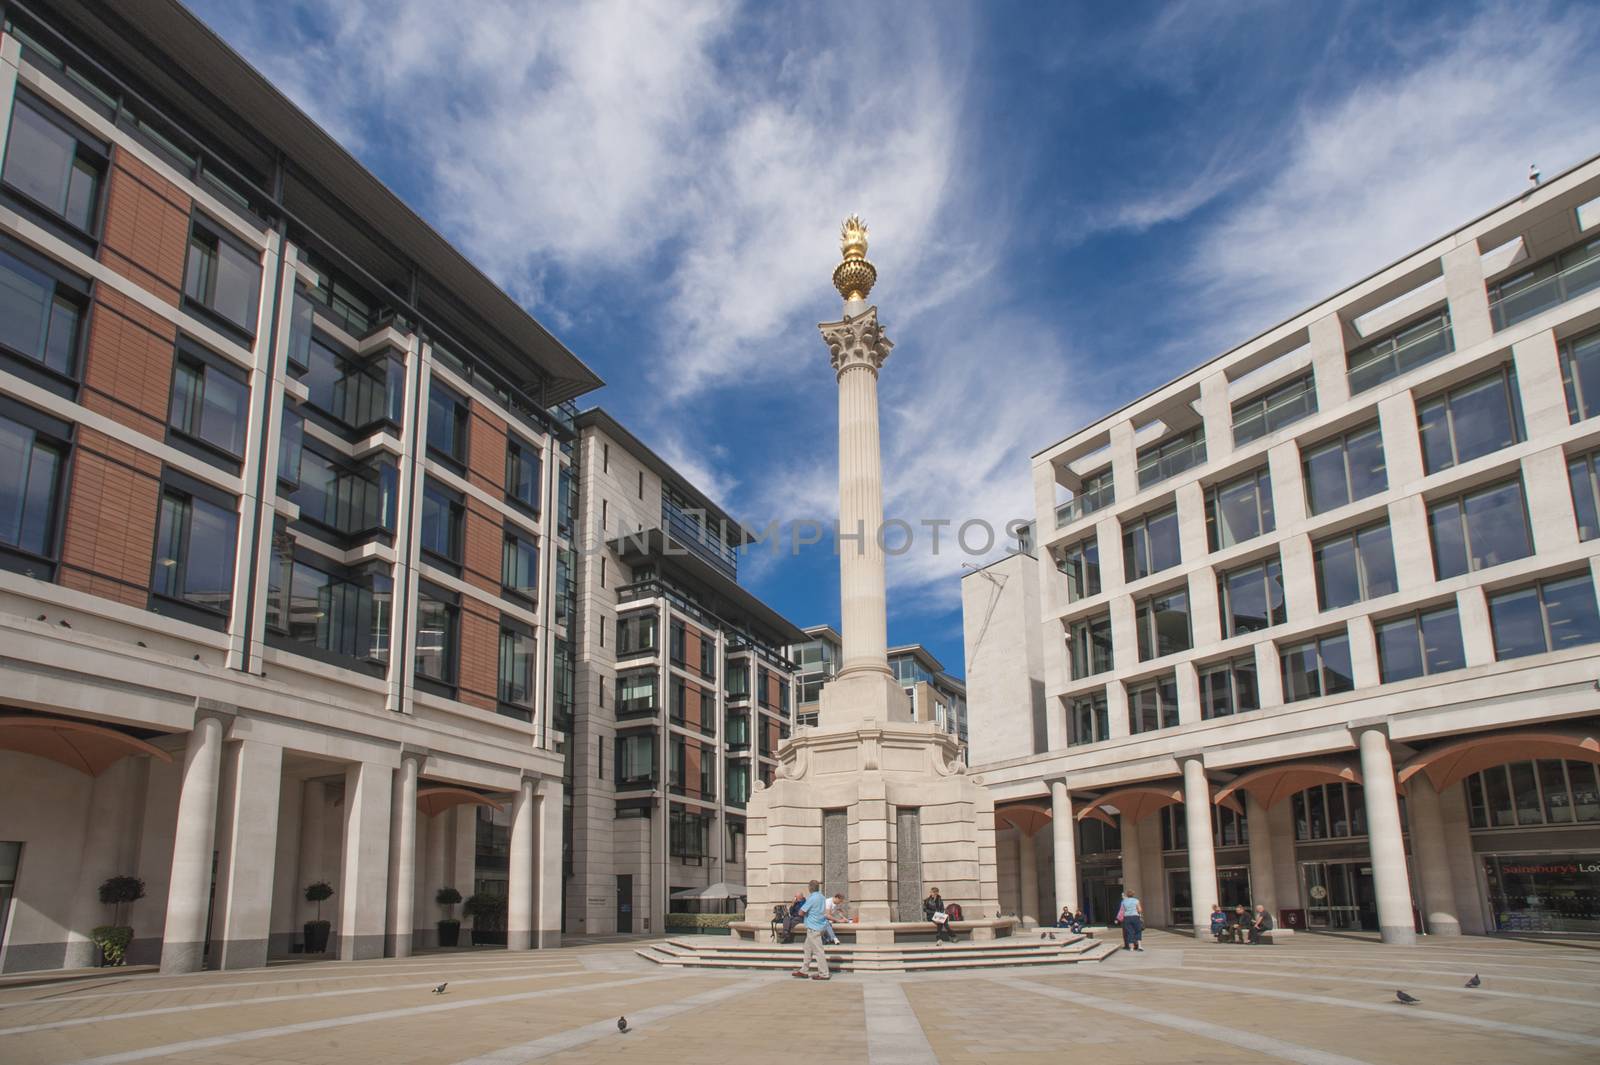 Paternoster Square by Alenmax